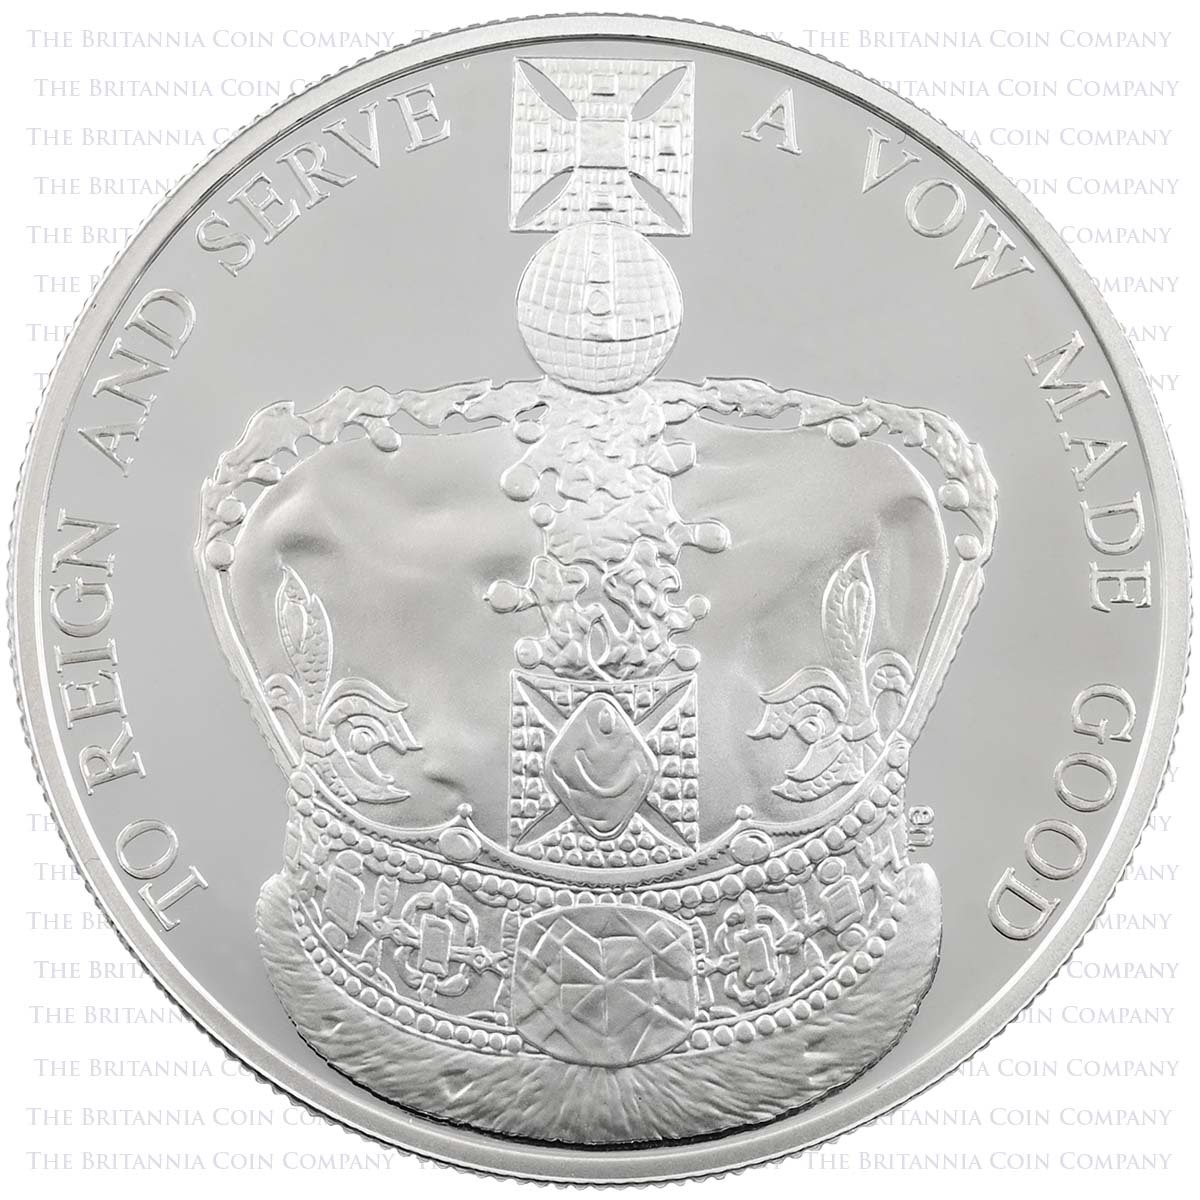 2013 Queen's Coronation 60th Anniversary Five Pound Crown Piedfort Silver Proof Coin Reverse